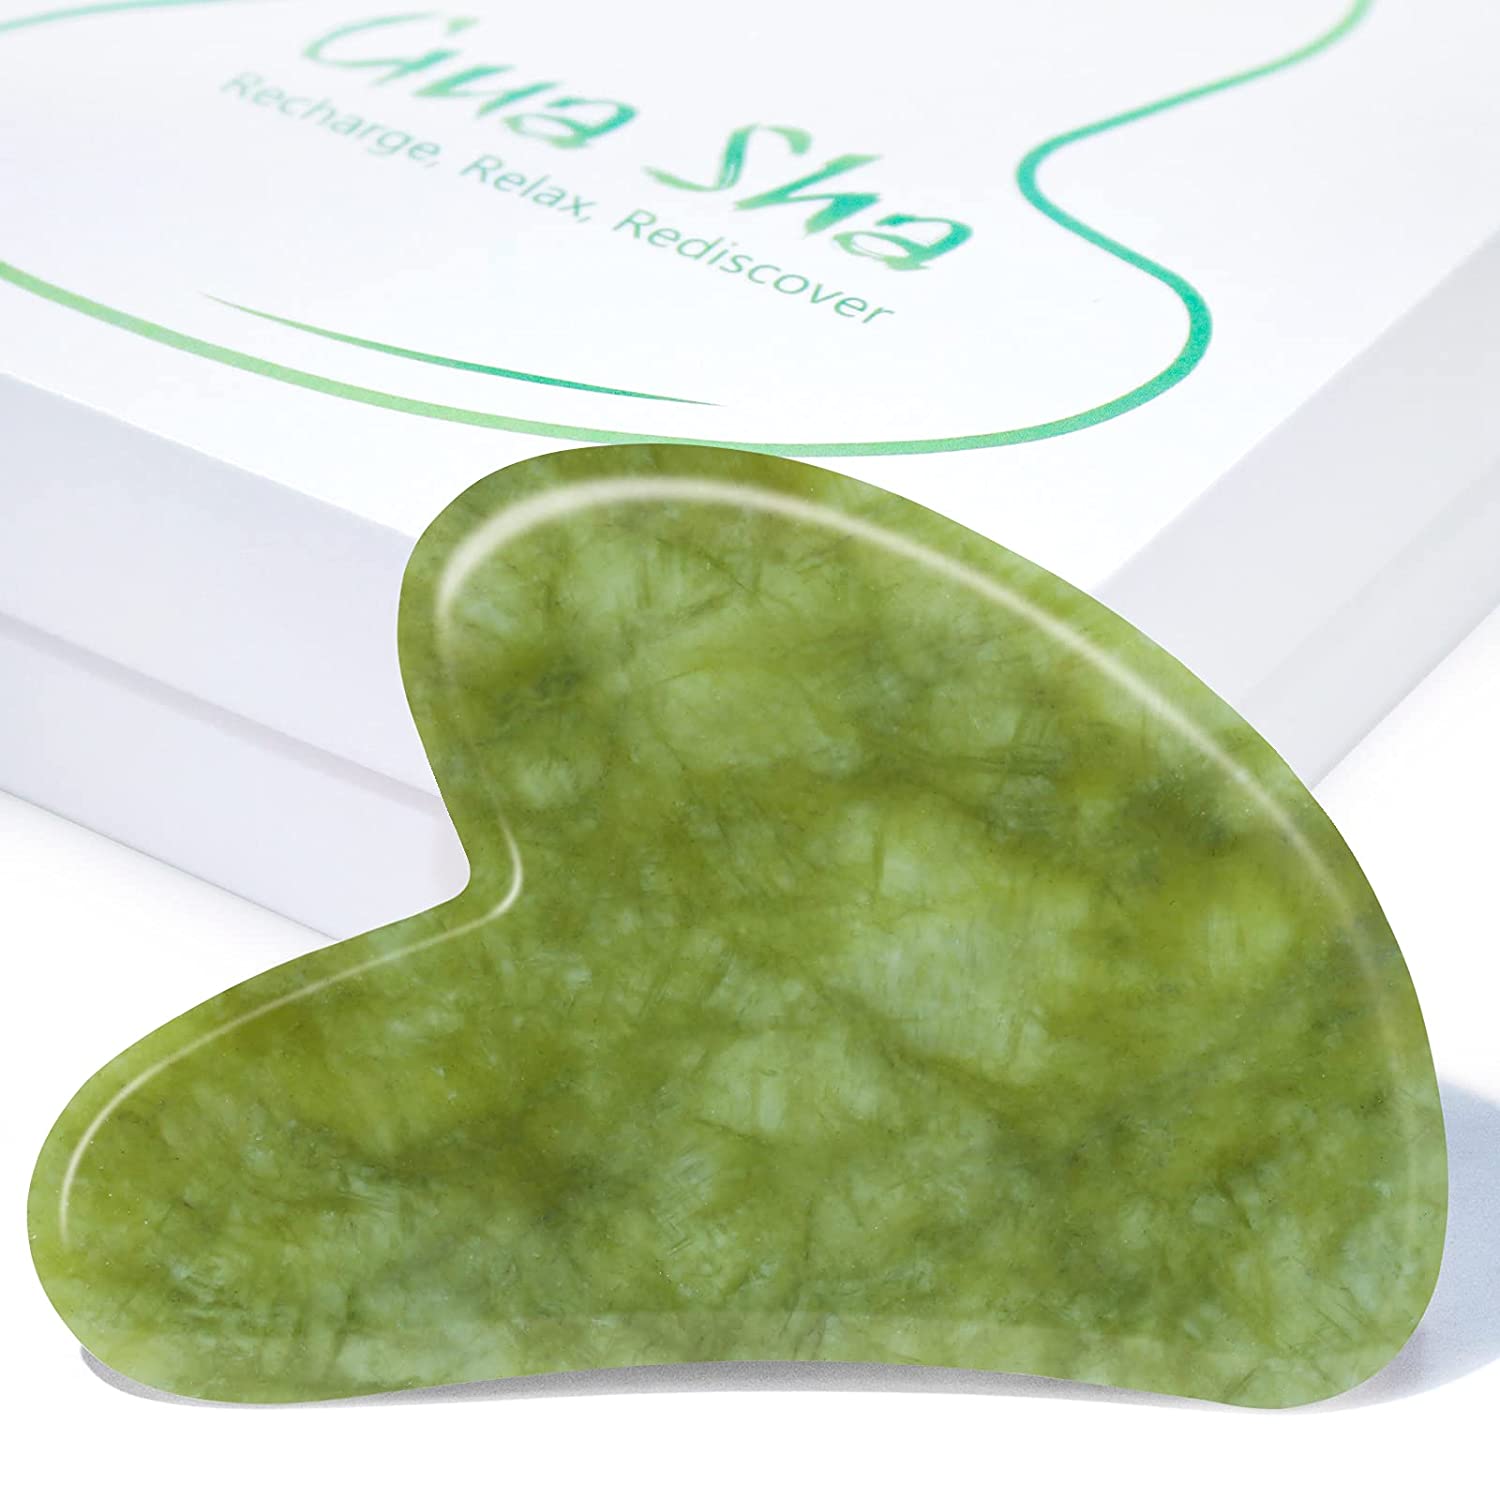 BEAKEY Gua Sha Facial Tool for Face and Body, Lymphatic Drainage Massage Tool for Deep Tissue of Tensions and Pains - BEAKEY